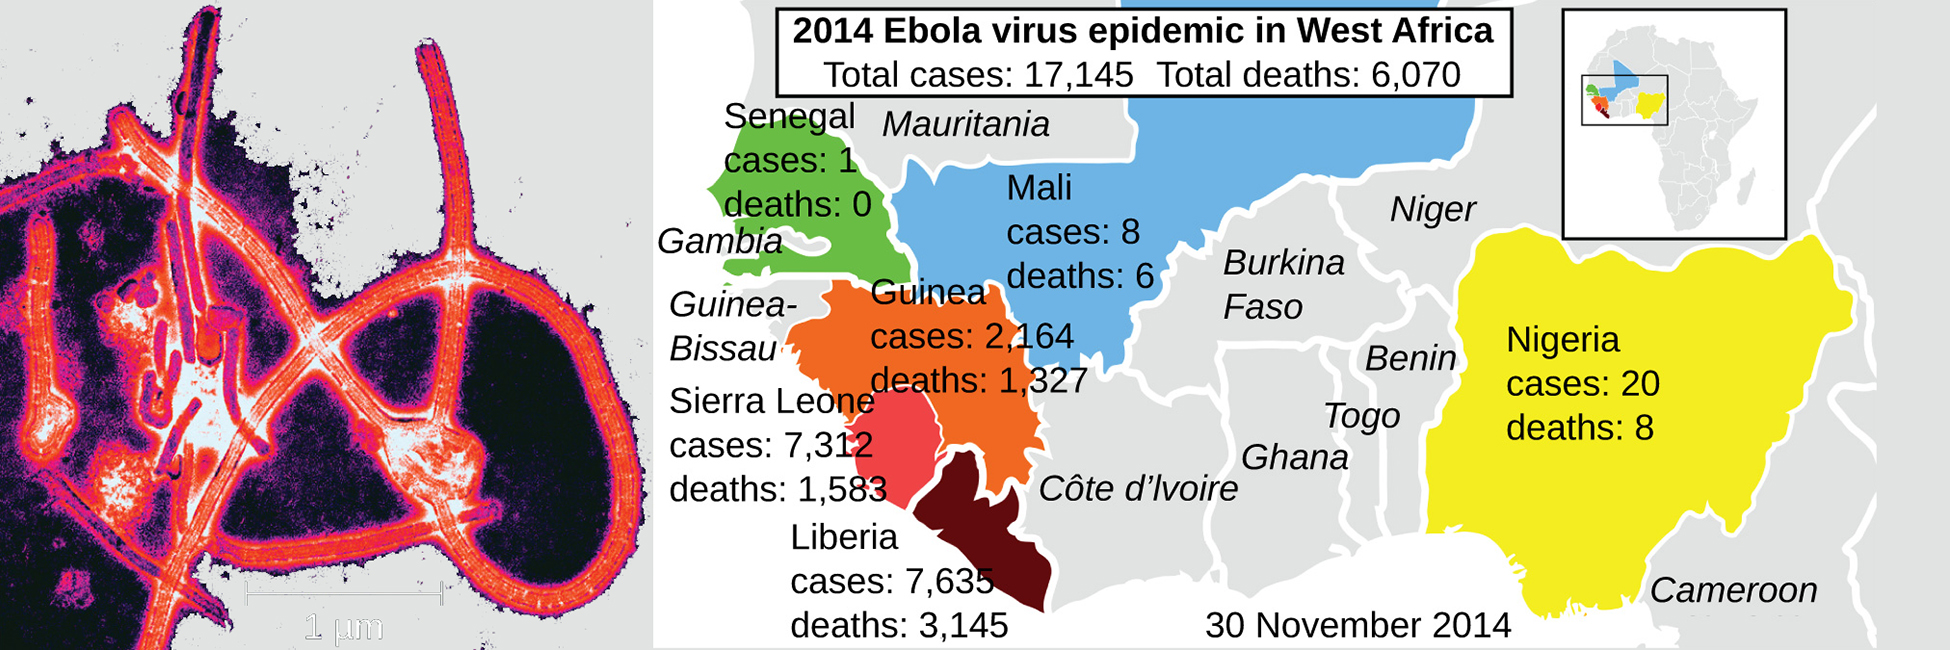 The electron micrograph shows linear viruses wrapped into a delta-shaped structure. The map shows 2014 Ebola epidemics in West Africa. There were 17,124 total cases and 6,070 total deaths. Senegal had 1 case and no deaths. Mali had 8 cases and 6 deaths. Guinea had 2,164 cases and 1,326 deaths, Sierra Leone had 7,312 cases and 1,583 deaths, Liberia had 7,635 cases and 3,145 deaths. Nigeria had 20 cases and 8 deaths.